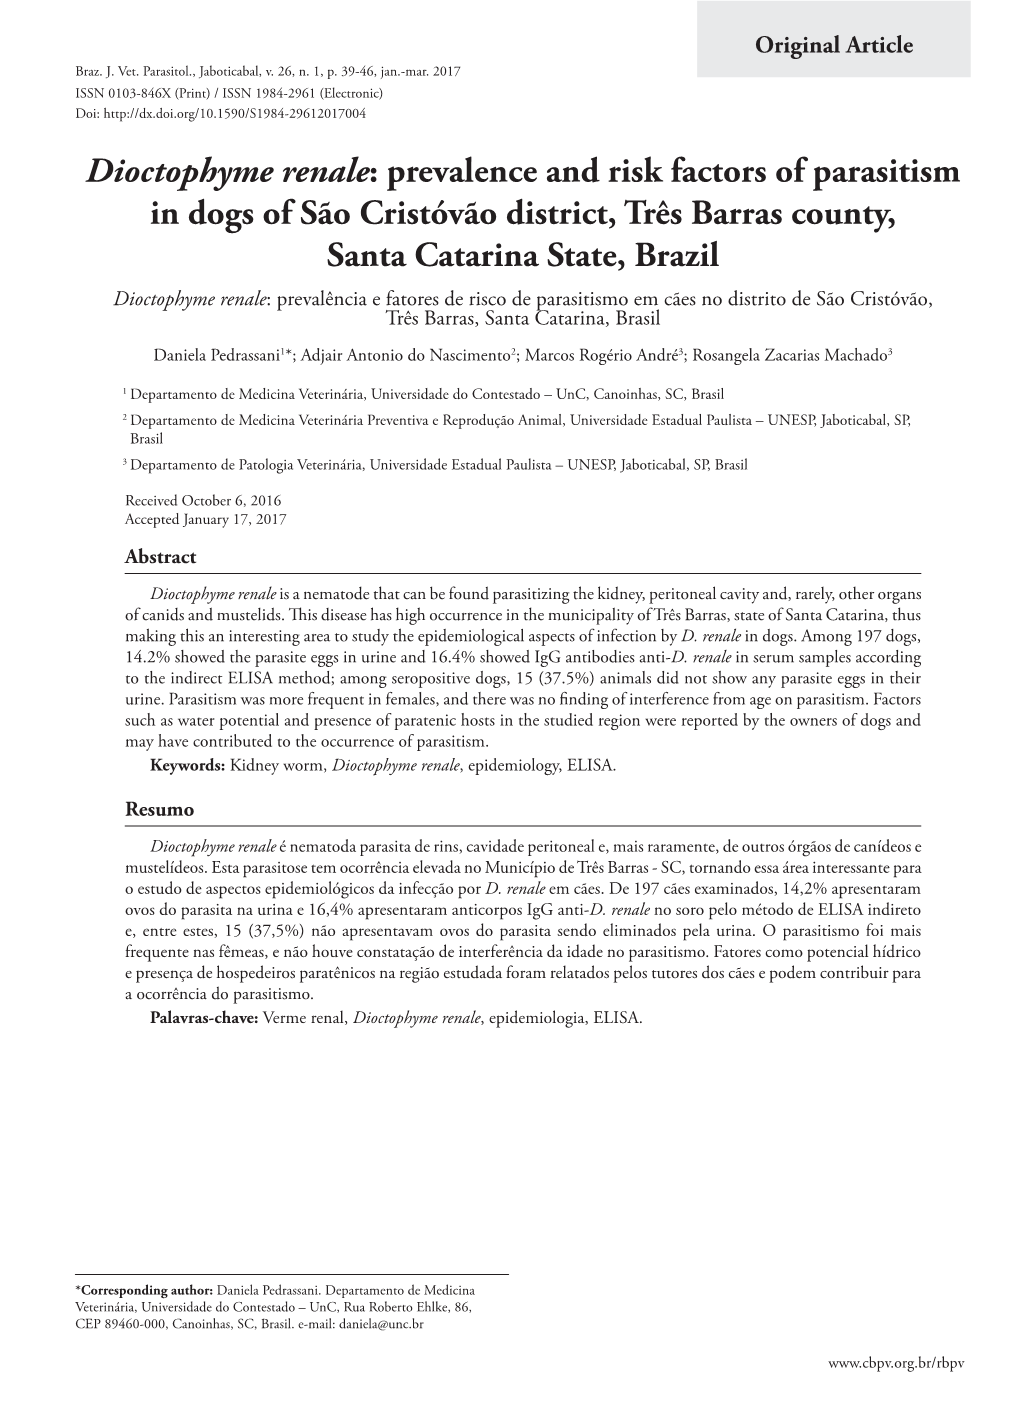 Dioctophyme Renale: Prevalence and Risk Factors of Parasitism in Dogs Of